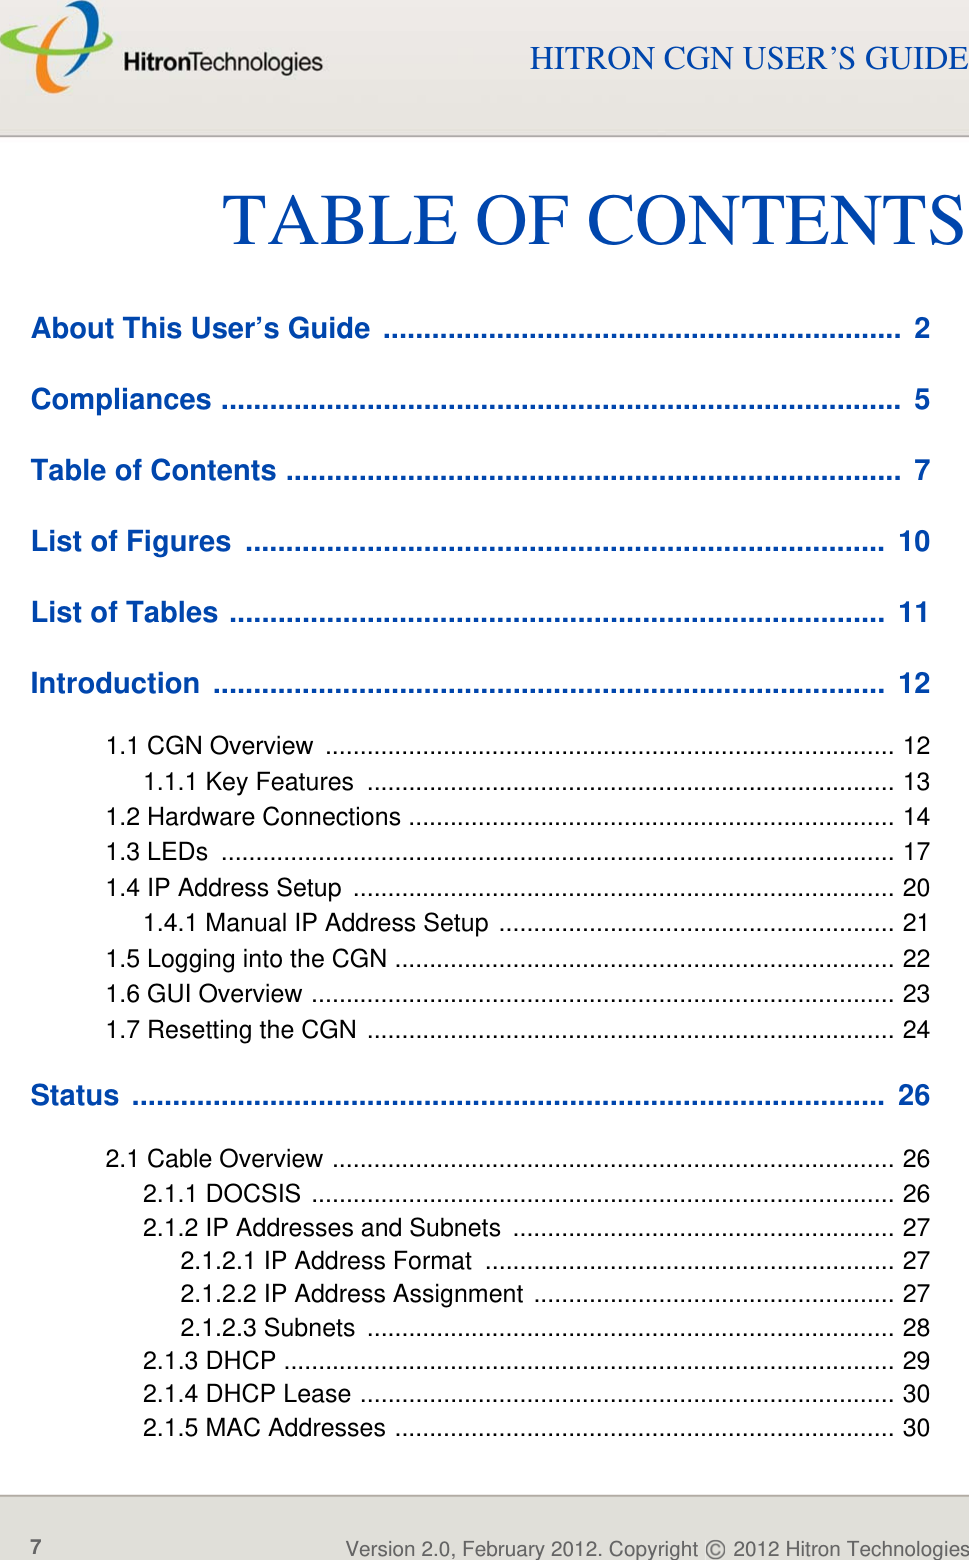 TABLE OF CONTENTSVersion 2.0, February 2012. Copyright   2012 Hitron Technologies7HITRON CGN USER’S GUIDETABLE OF CONTENTSAbout This User’s Guide  ................................................................  2Compliances ....................................................................................  5Table of Contents ............................................................................  7List of Figures  ...............................................................................  10List of Tables .................................................................................  11Introduction ...................................................................................  121.1 CGN Overview  .................................................................................. 121.1.1 Key Features  ............................................................................ 131.2 Hardware Connections ...................................................................... 141.3 LEDs  ................................................................................................. 171.4 IP Address Setup  .............................................................................. 201.4.1 Manual IP Address Setup ......................................................... 211.5 Logging into the CGN ........................................................................ 221.6 GUI Overview .................................................................................... 231.7 Resetting the CGN ............................................................................ 24Status .............................................................................................  262.1 Cable Overview ................................................................................. 262.1.1 DOCSIS .................................................................................... 262.1.2 IP Addresses and Subnets ....................................................... 272.1.2.1 IP Address Format  ........................................................... 272.1.2.2 IP Address Assignment .................................................... 272.1.2.3 Subnets  ............................................................................ 282.1.3 DHCP ........................................................................................ 292.1.4 DHCP Lease ............................................................................. 302.1.5 MAC Addresses ........................................................................ 30